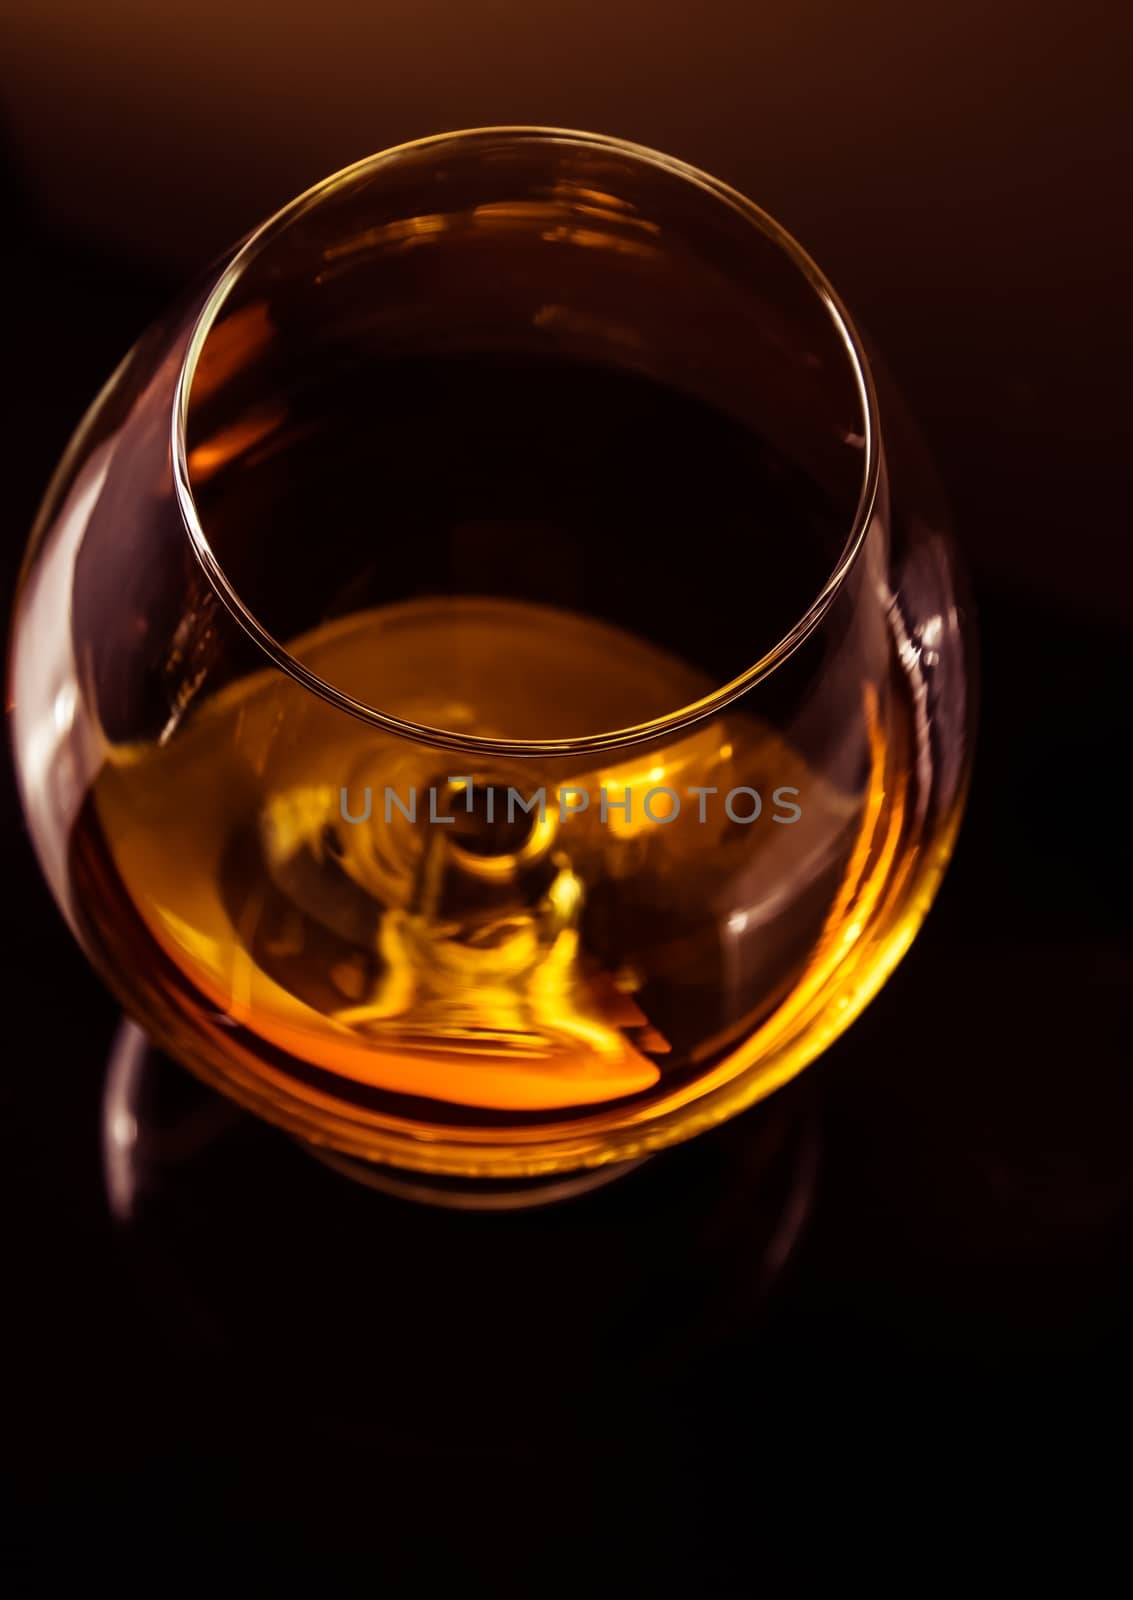 top of view of snifter of brandy in elegant typical cognac glass on dark background with golden reflection, warm atmosphere